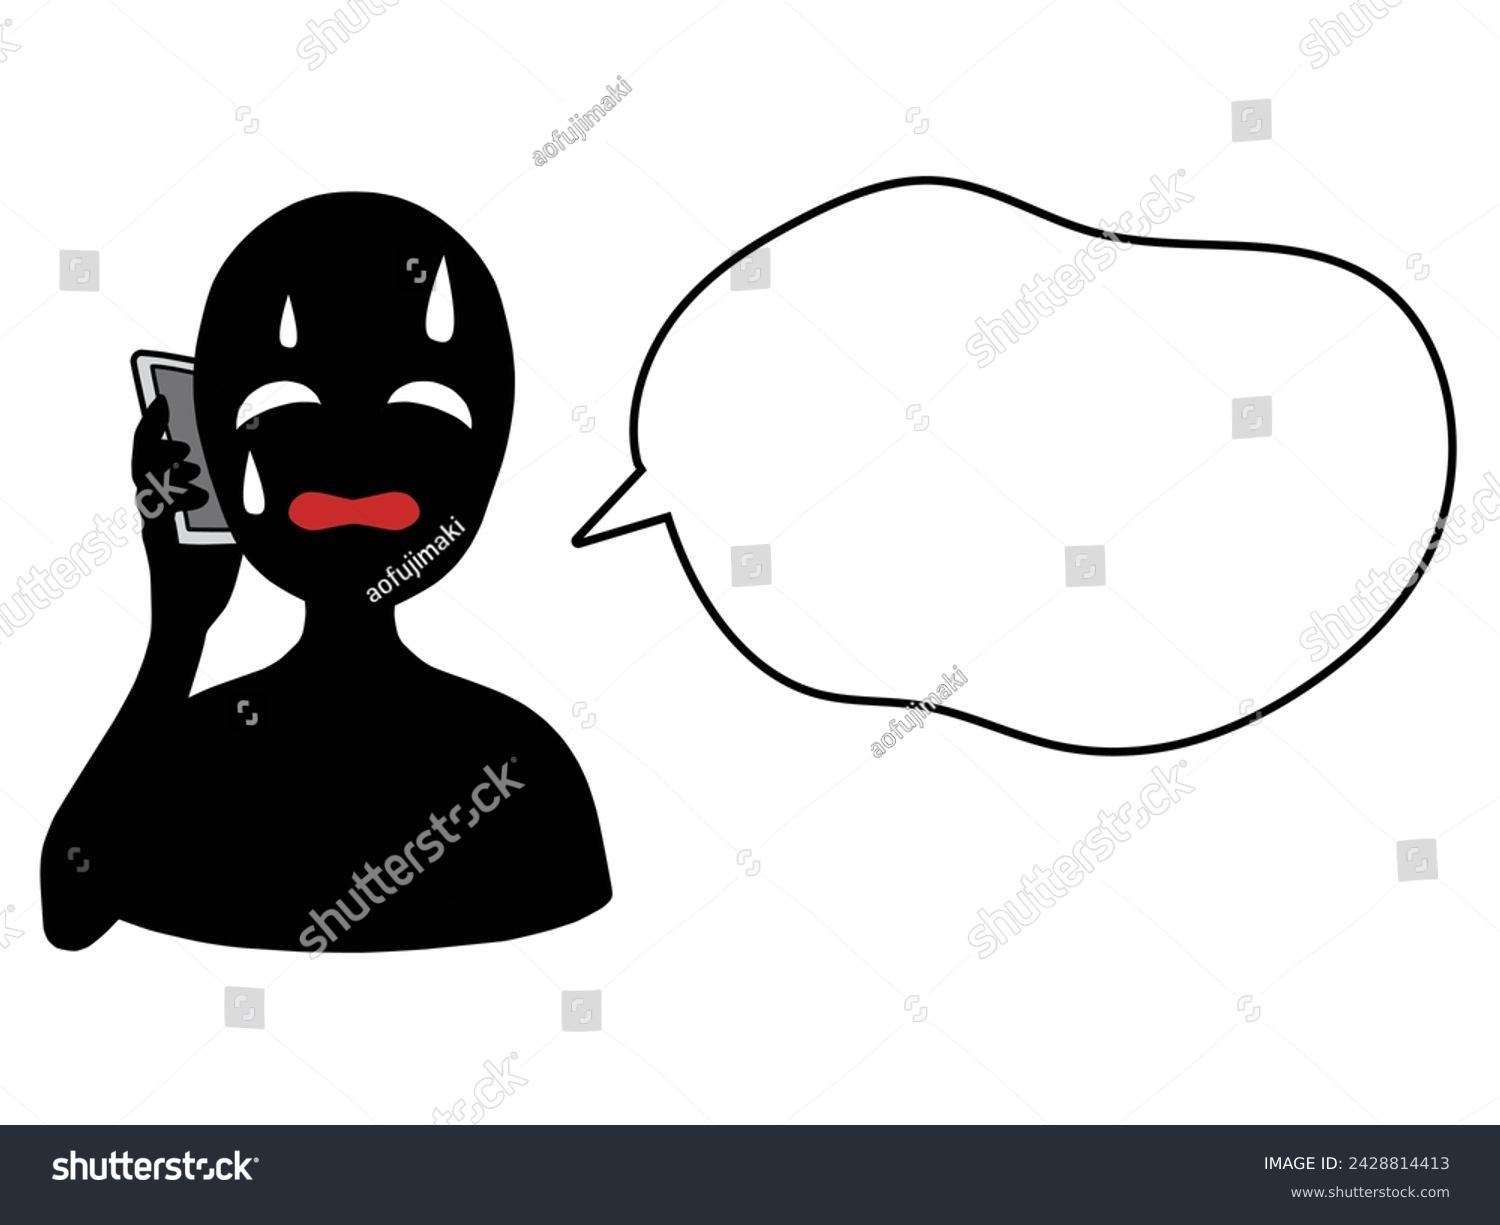 SVG of Illustration material of a person with the image of a bad guy holding a smartphone and a speech bubble svg